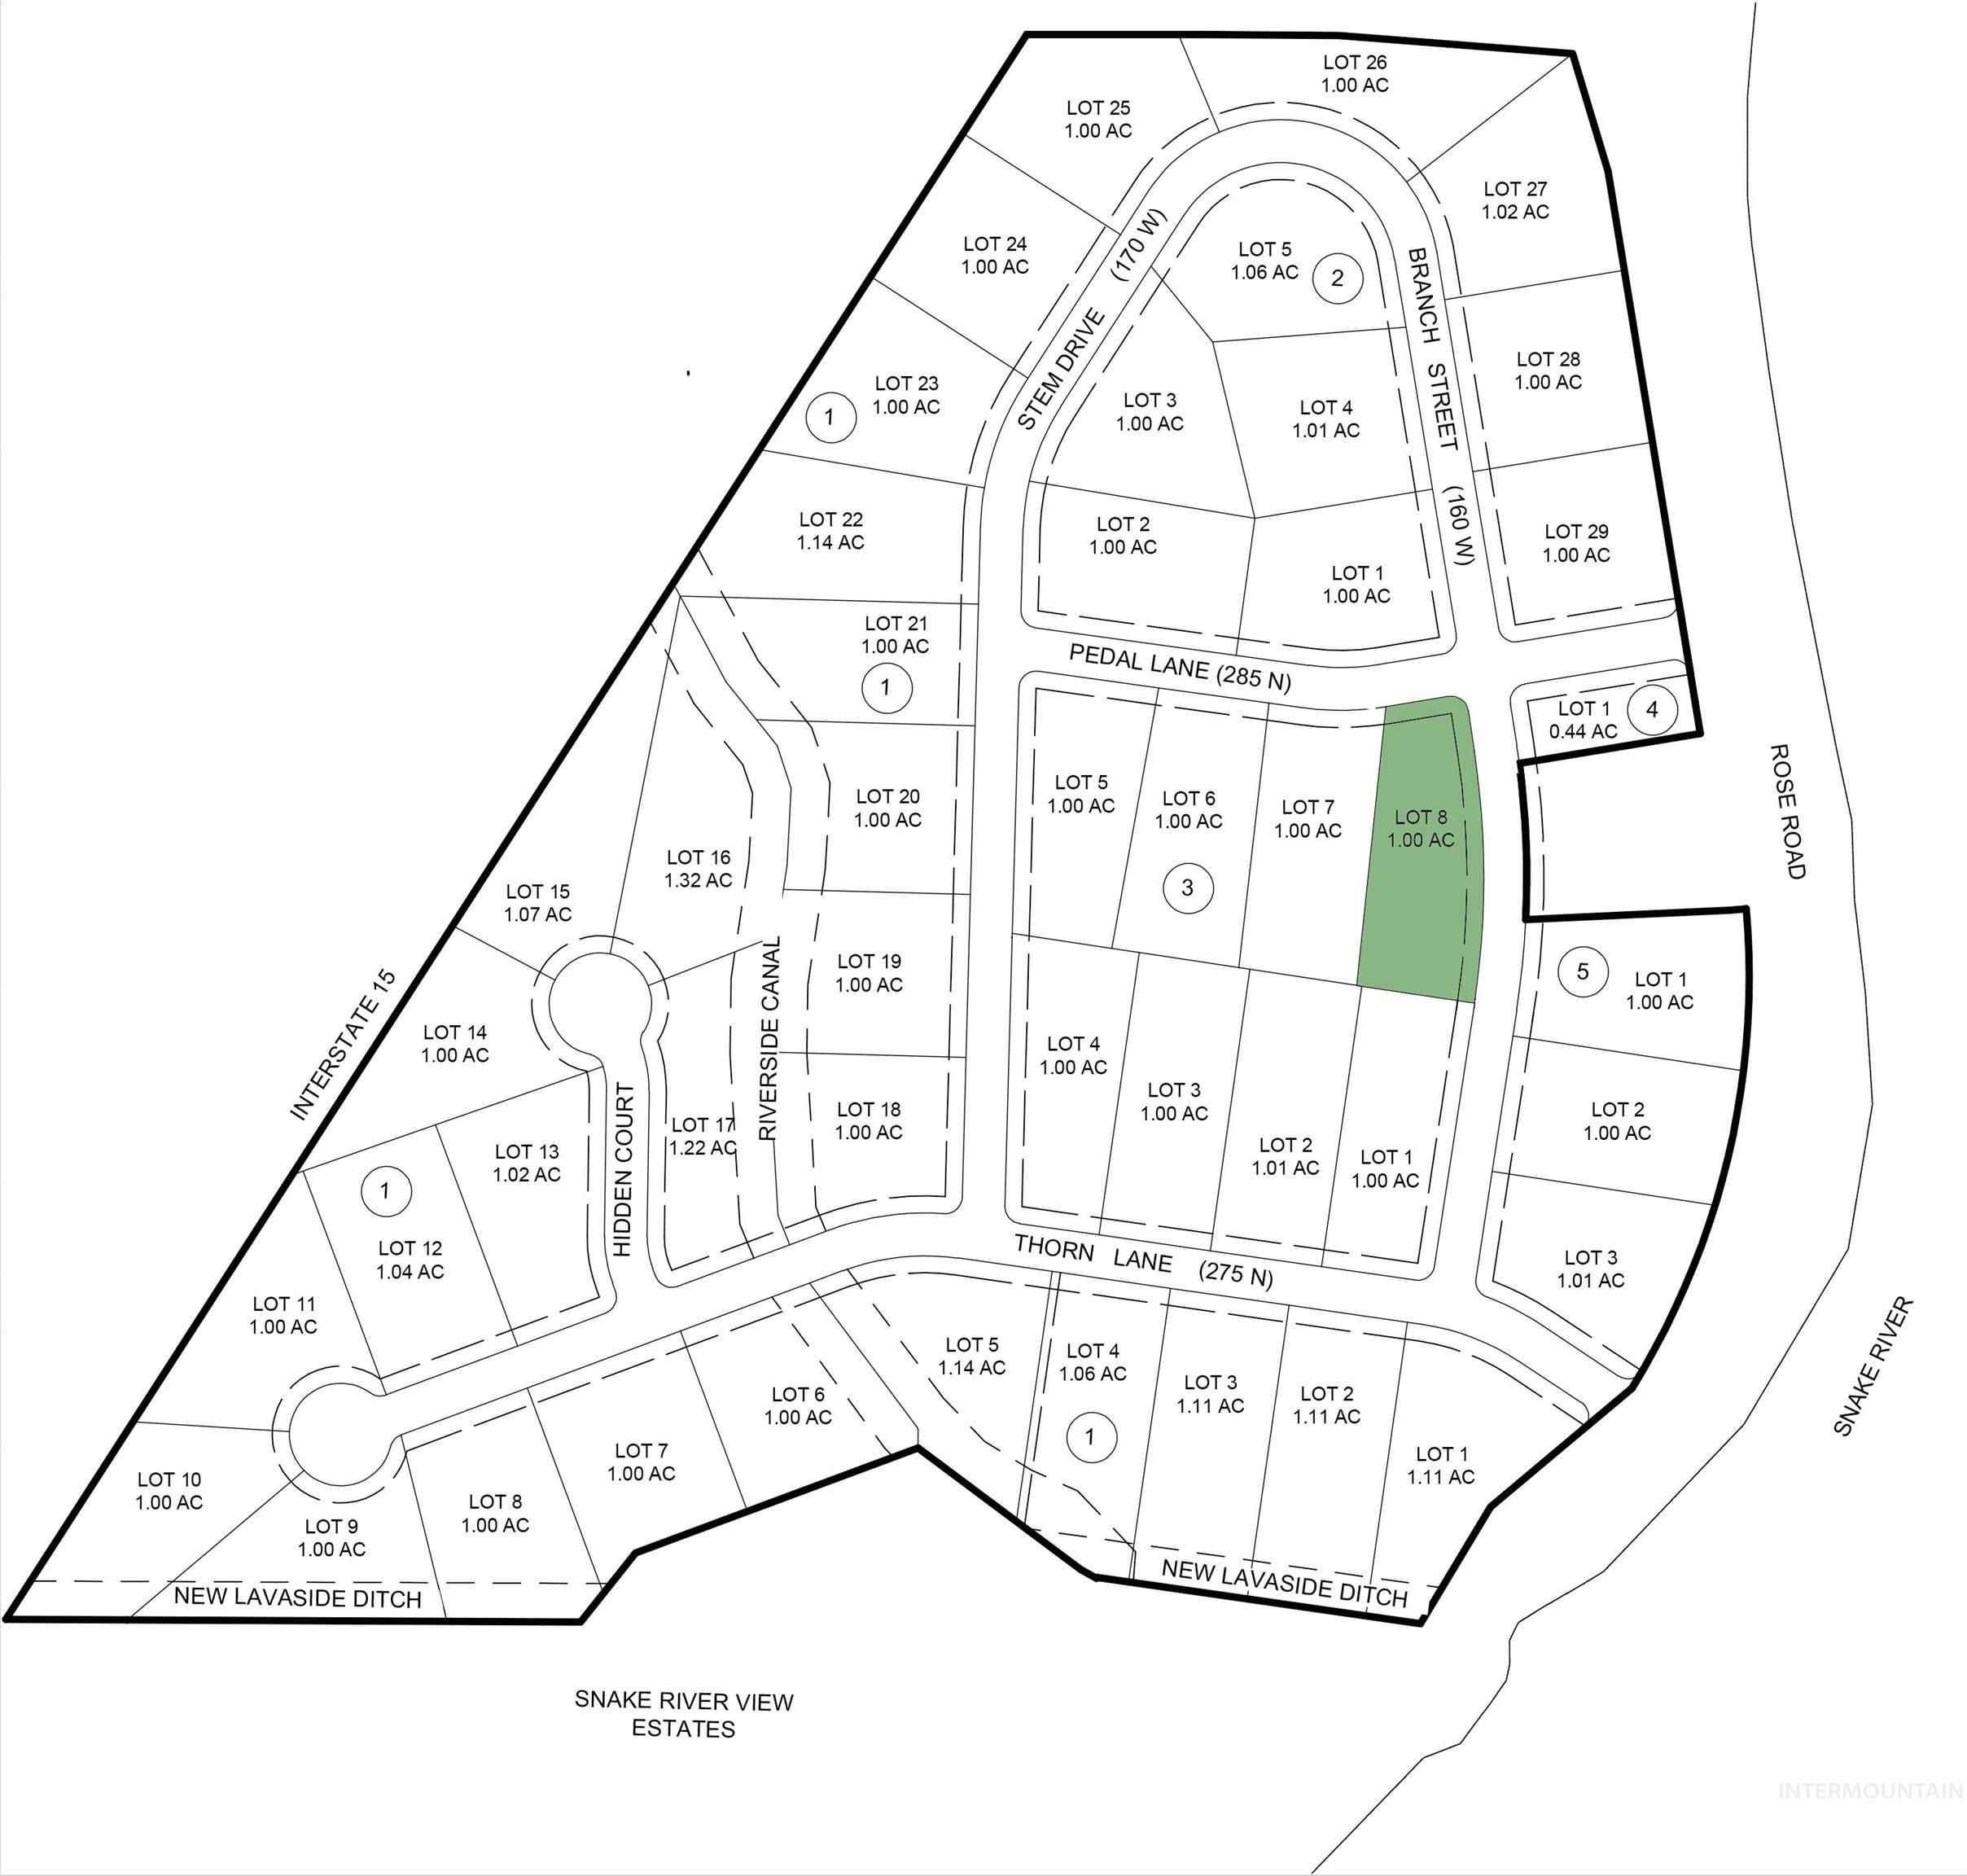 Property Image for Tbd Block 3 Lot 8